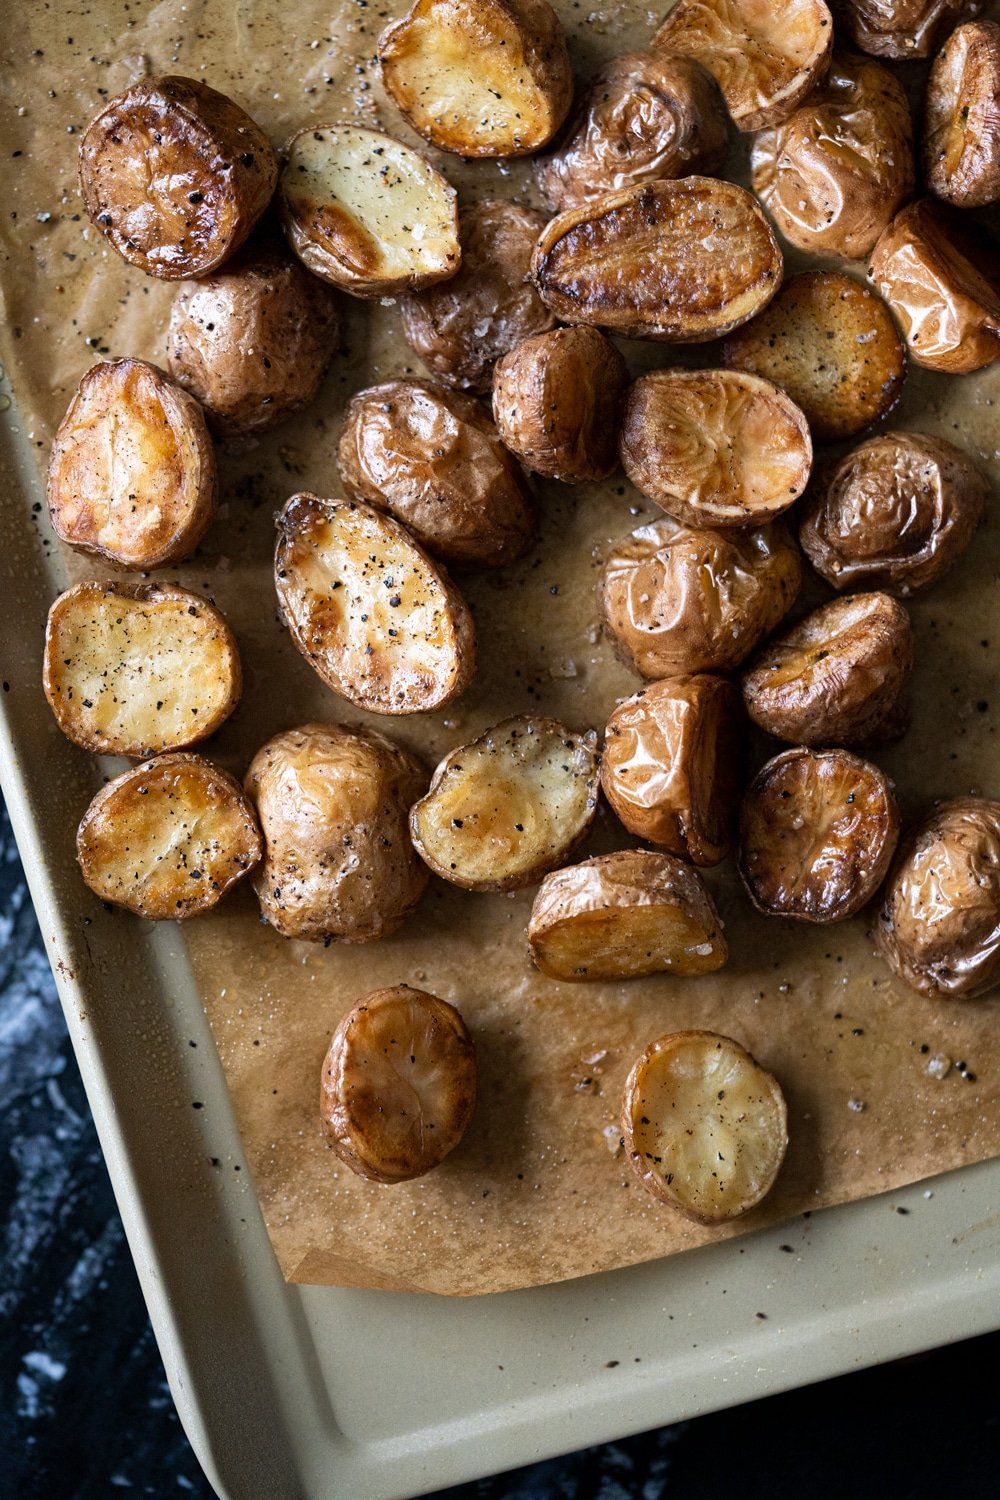 Resistant starch potatoes cooled and reheated on a baking tray